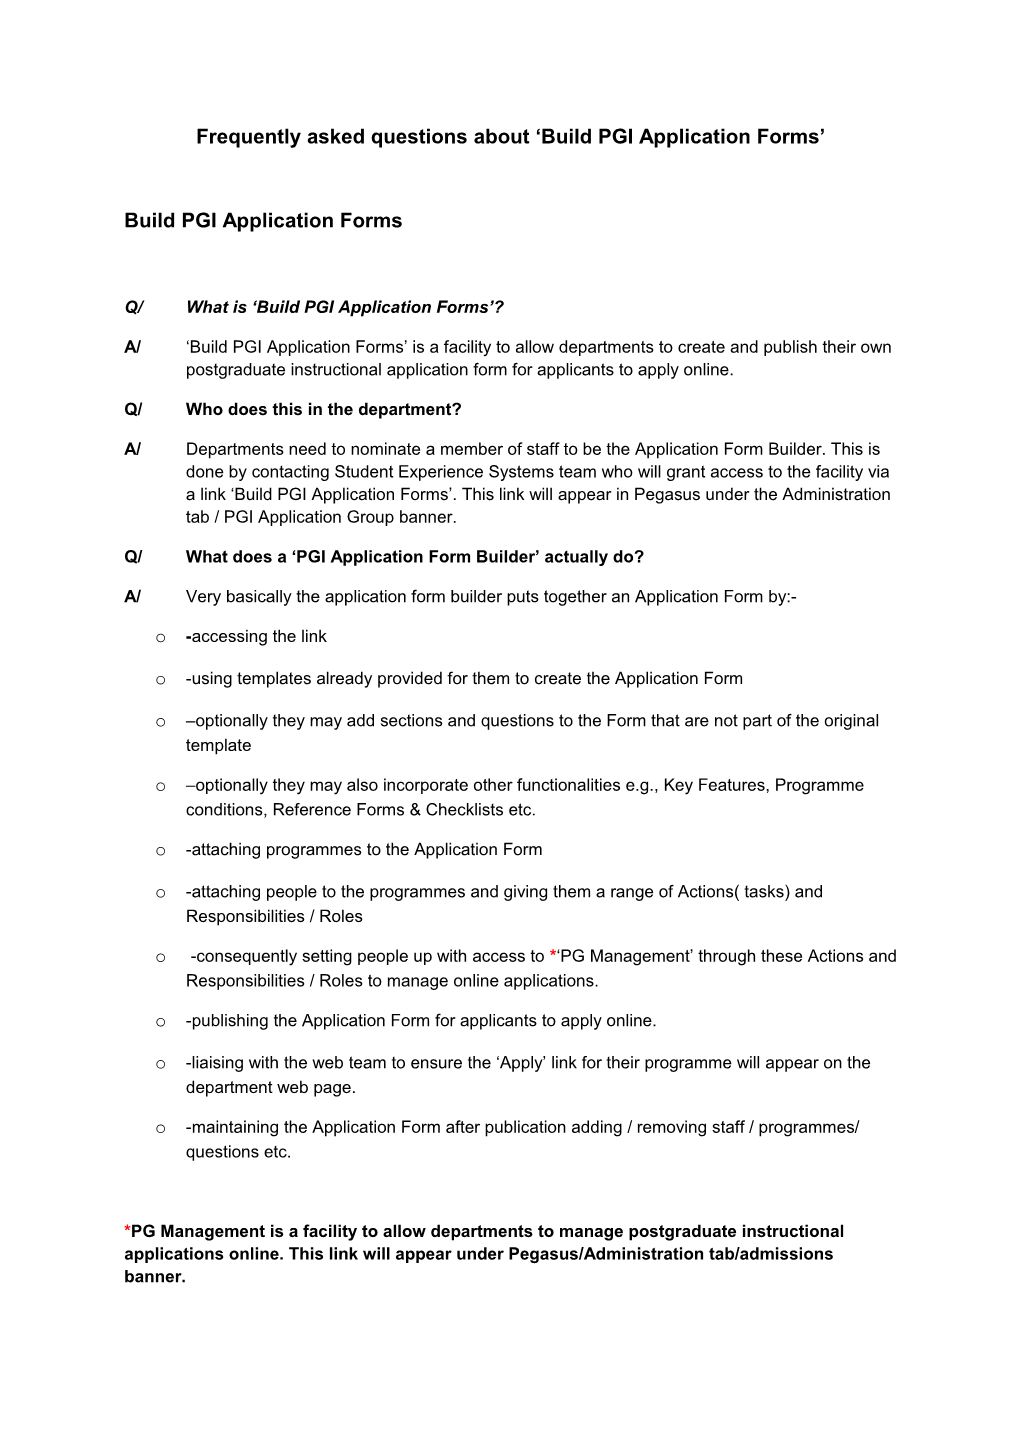 Frequently Asked Questions About Build PGI Application Forms